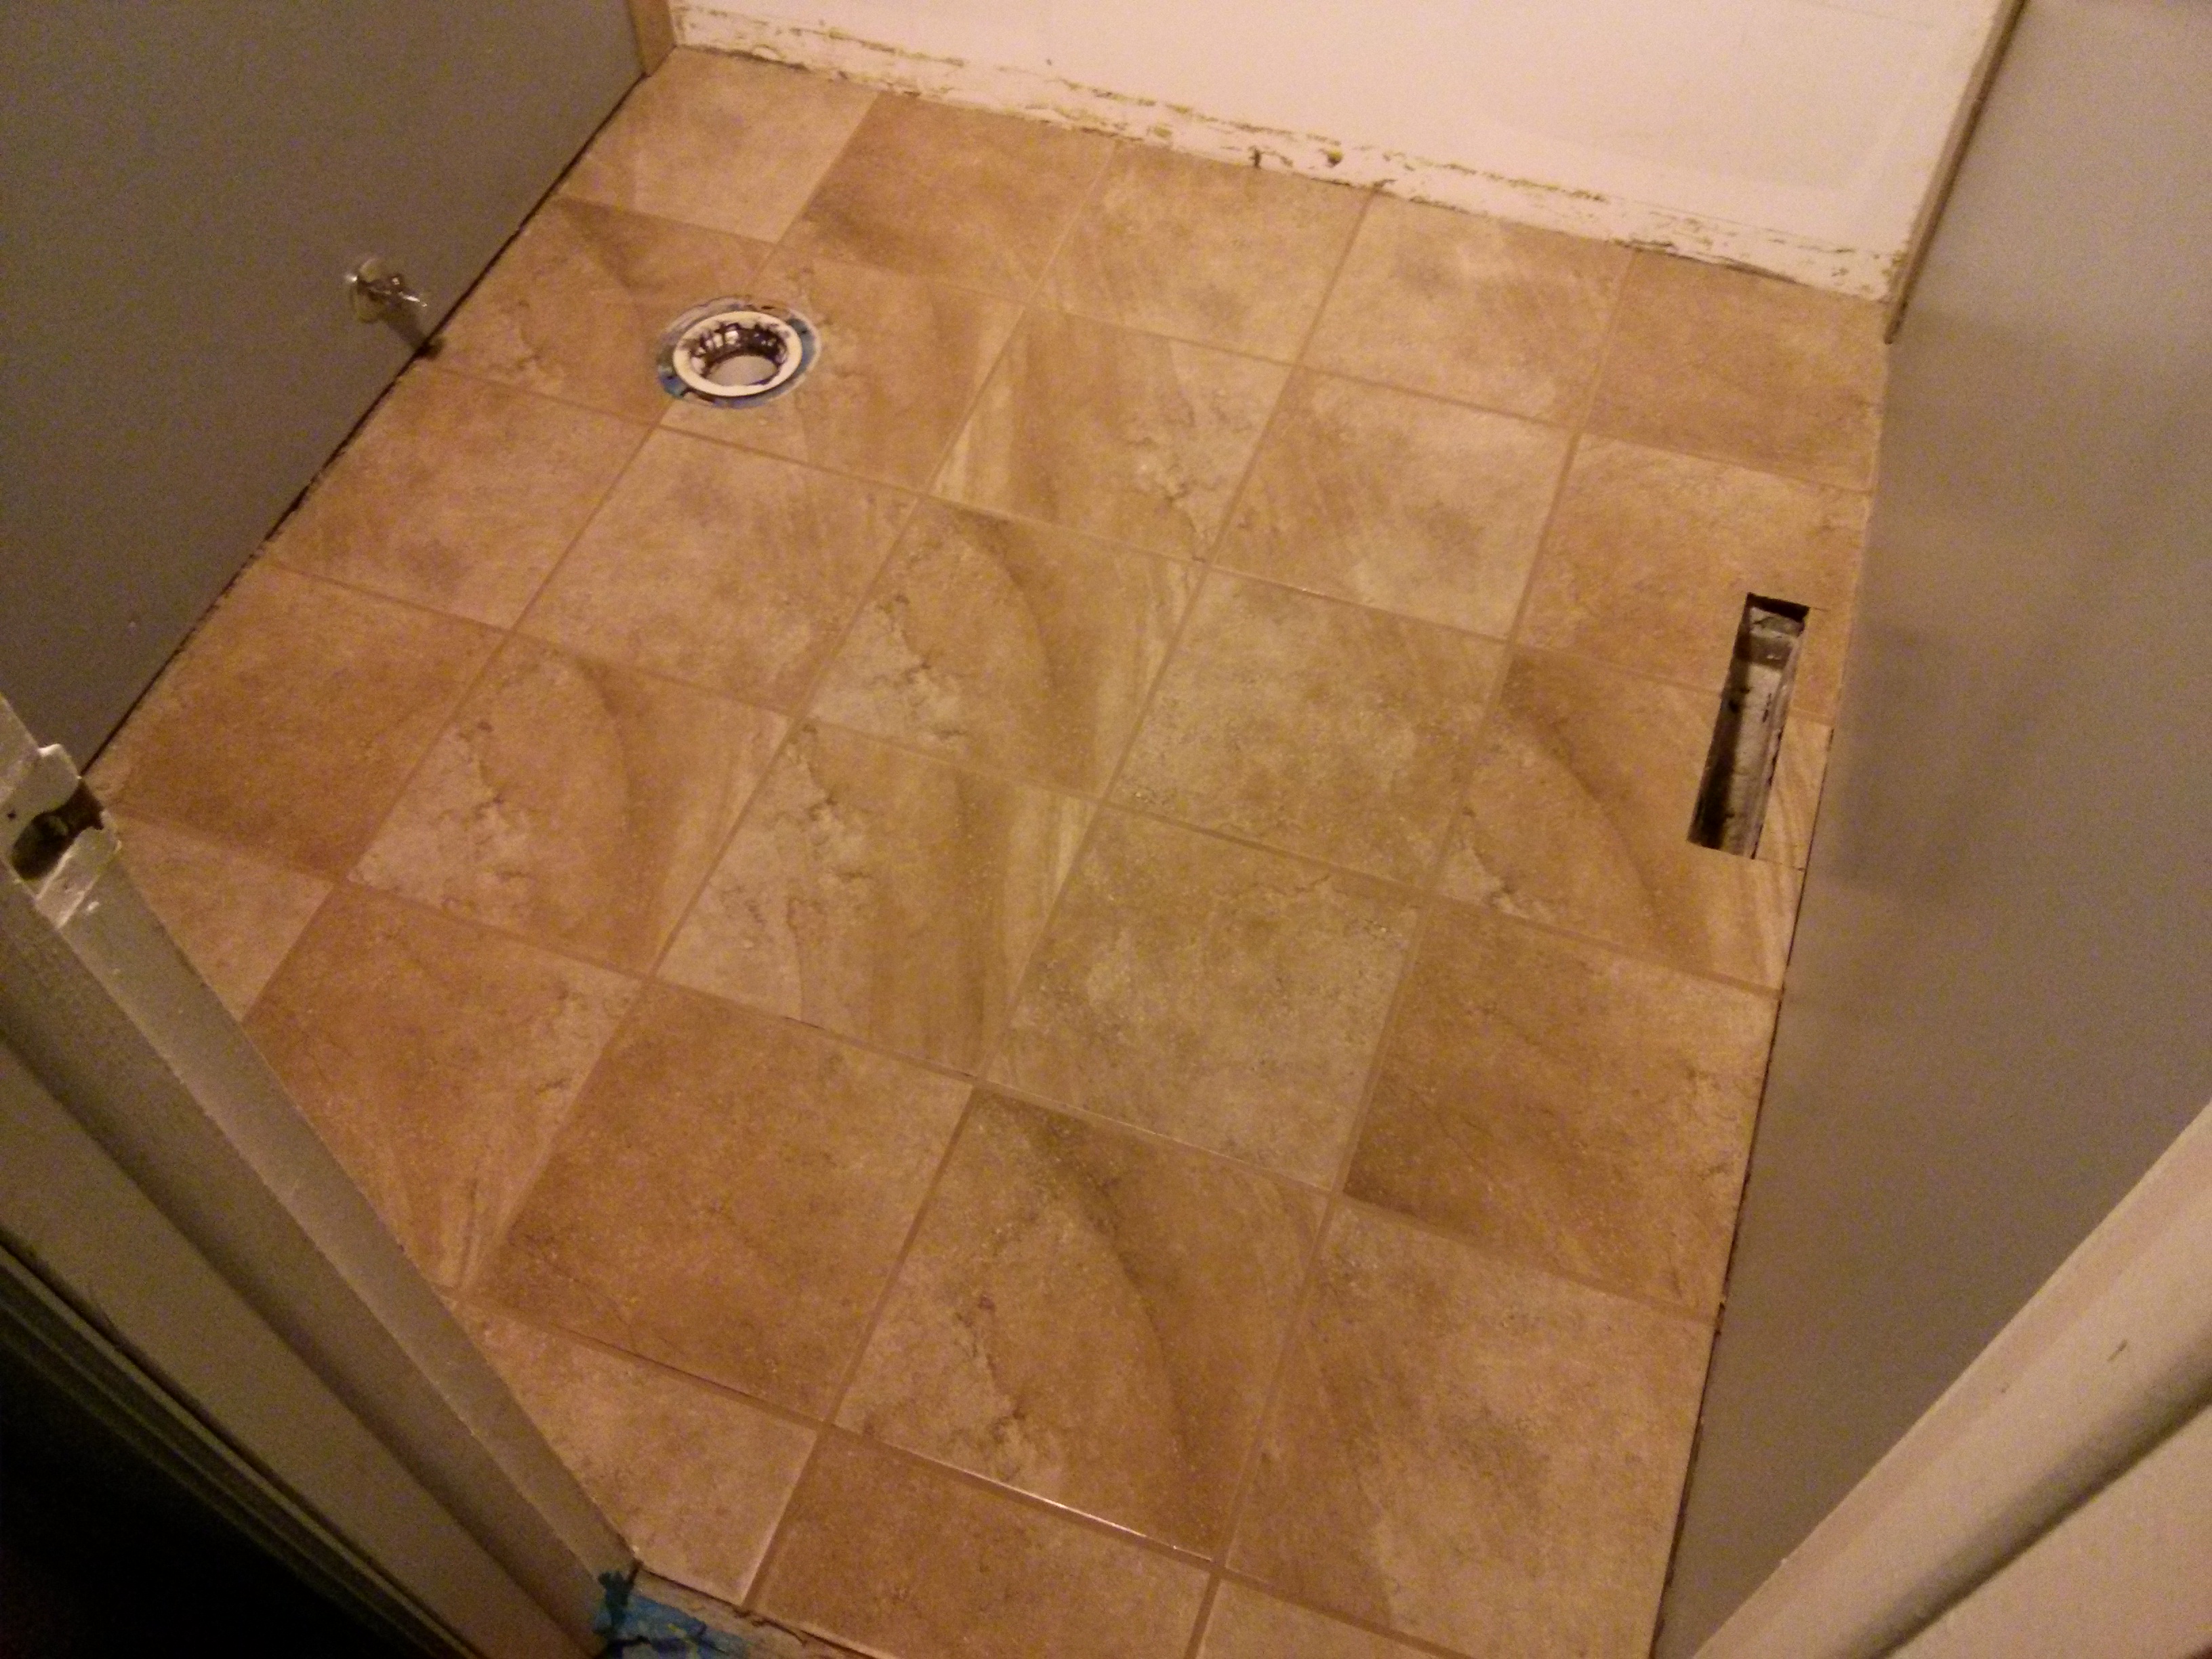 tiled and grouted bathroom floor